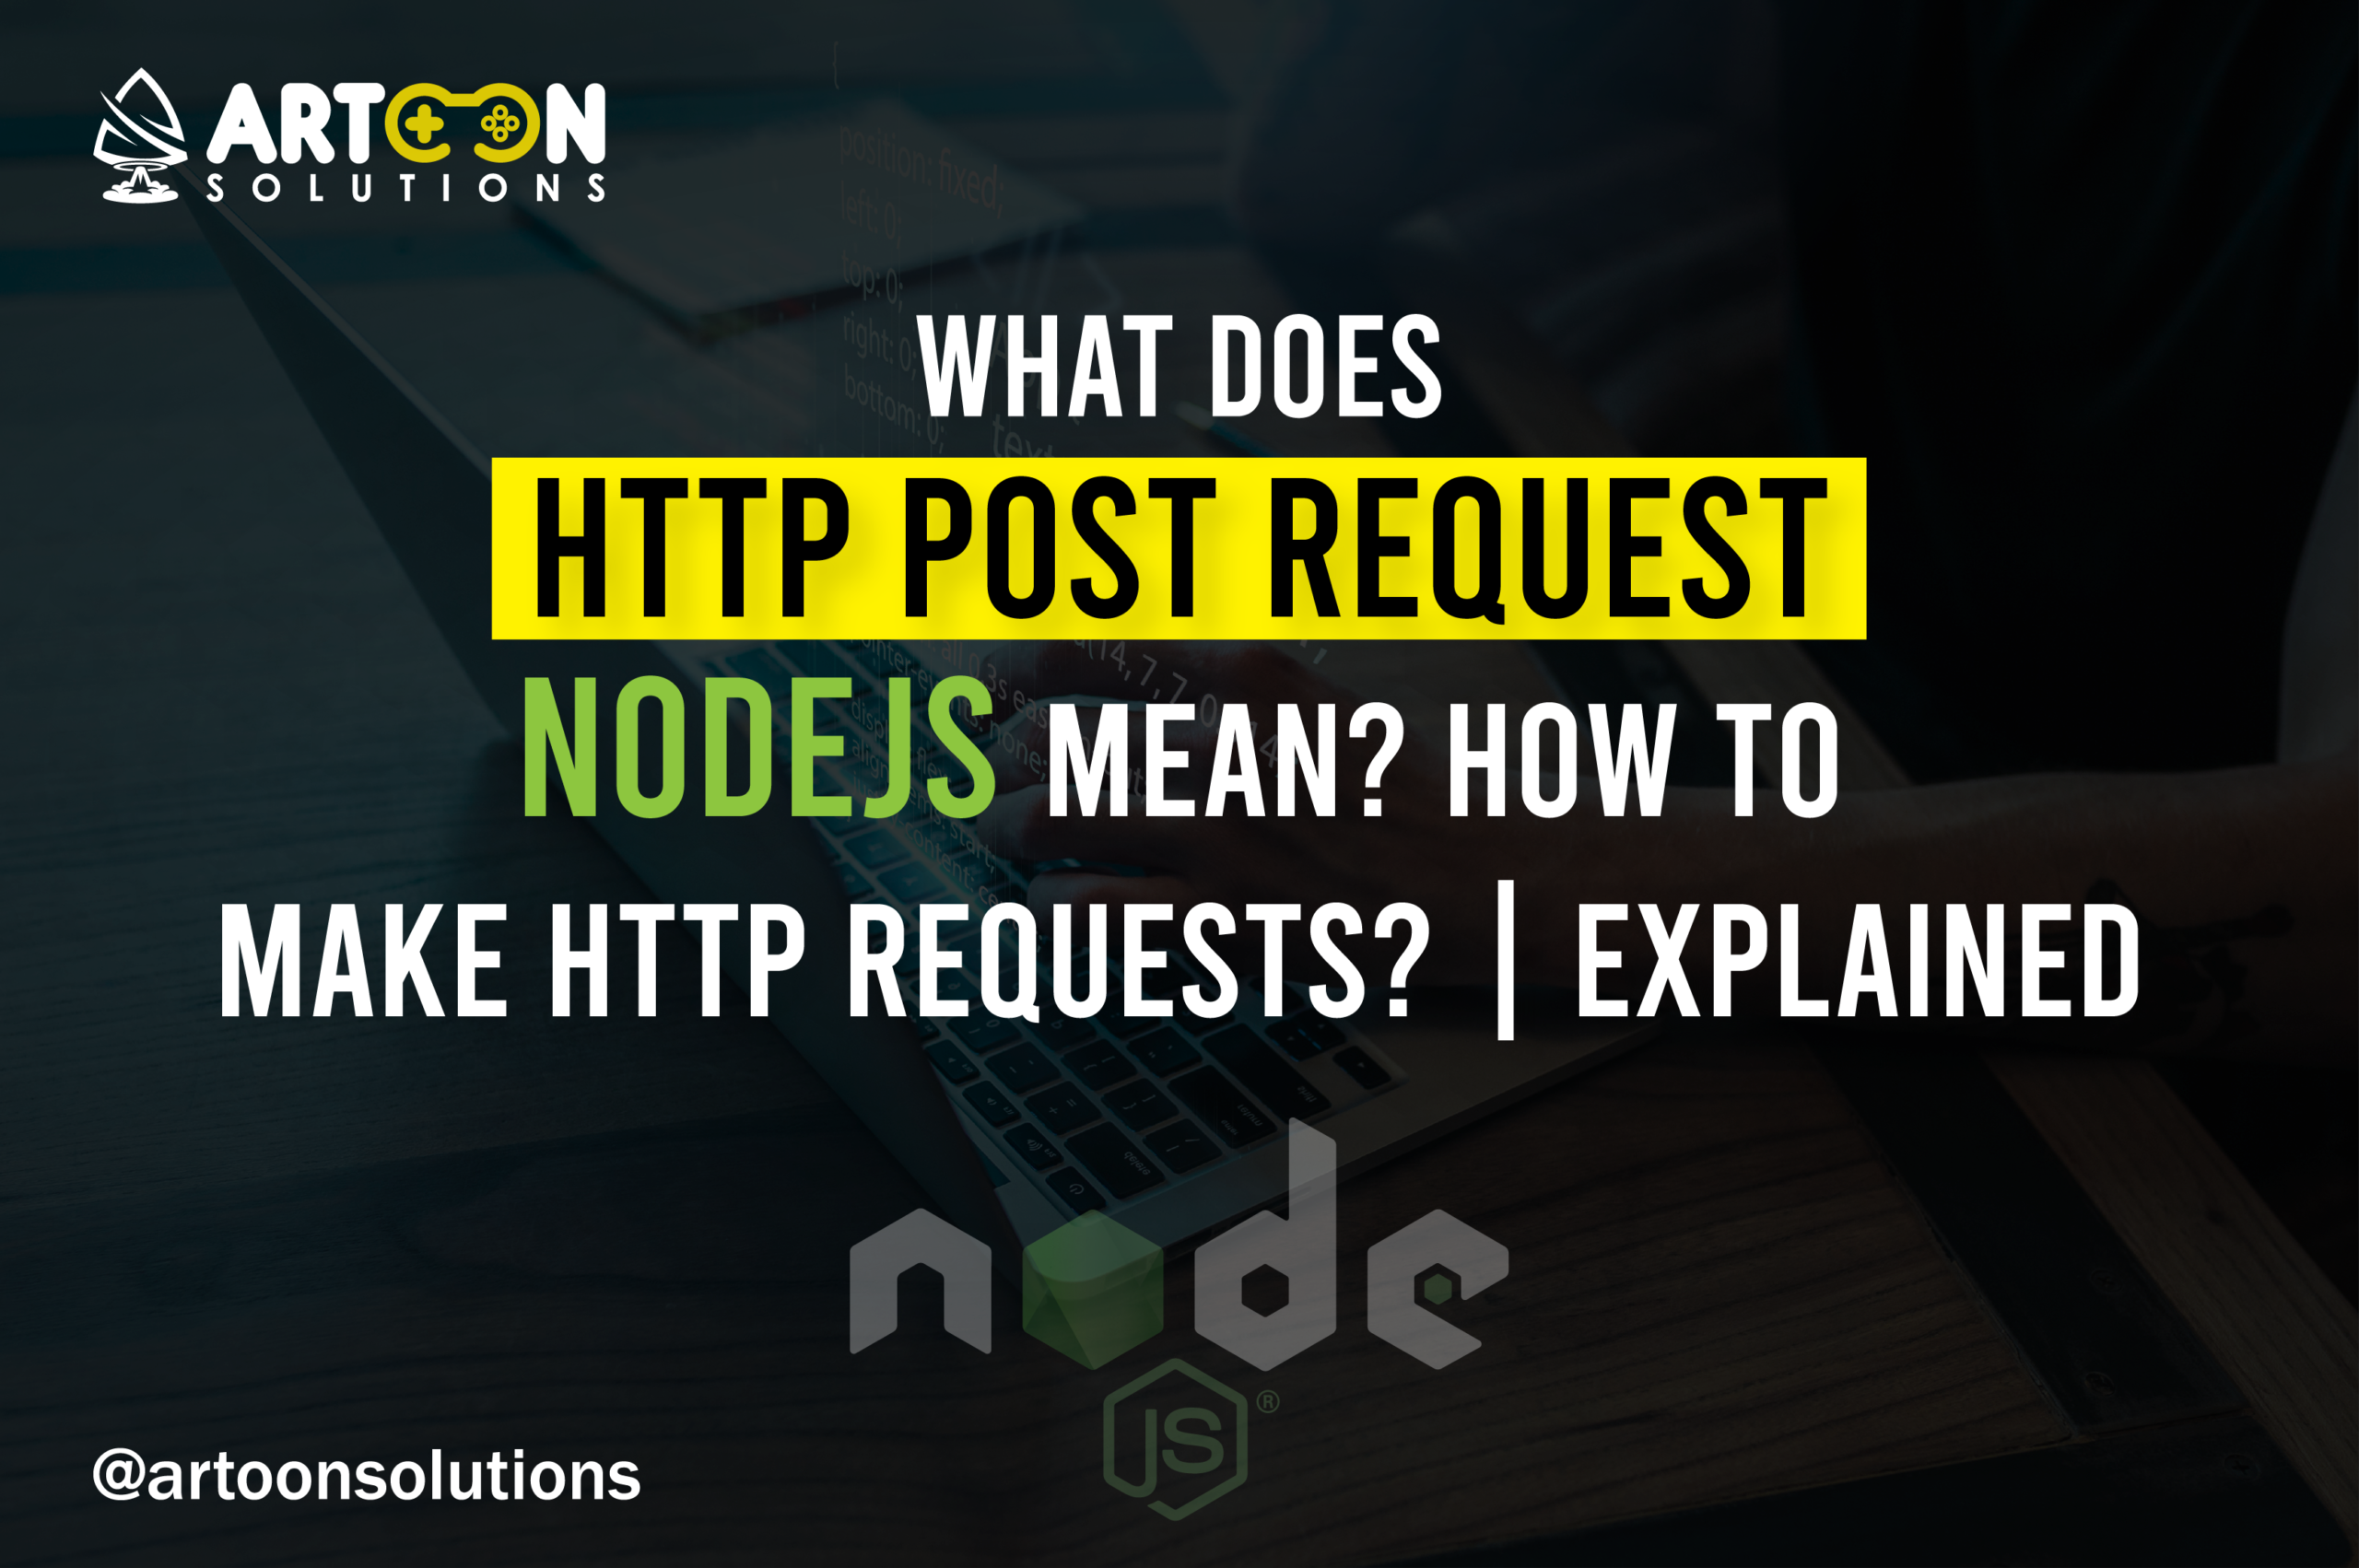 What does HTTP POST request NodeJS mean? How to make HTTP requests?